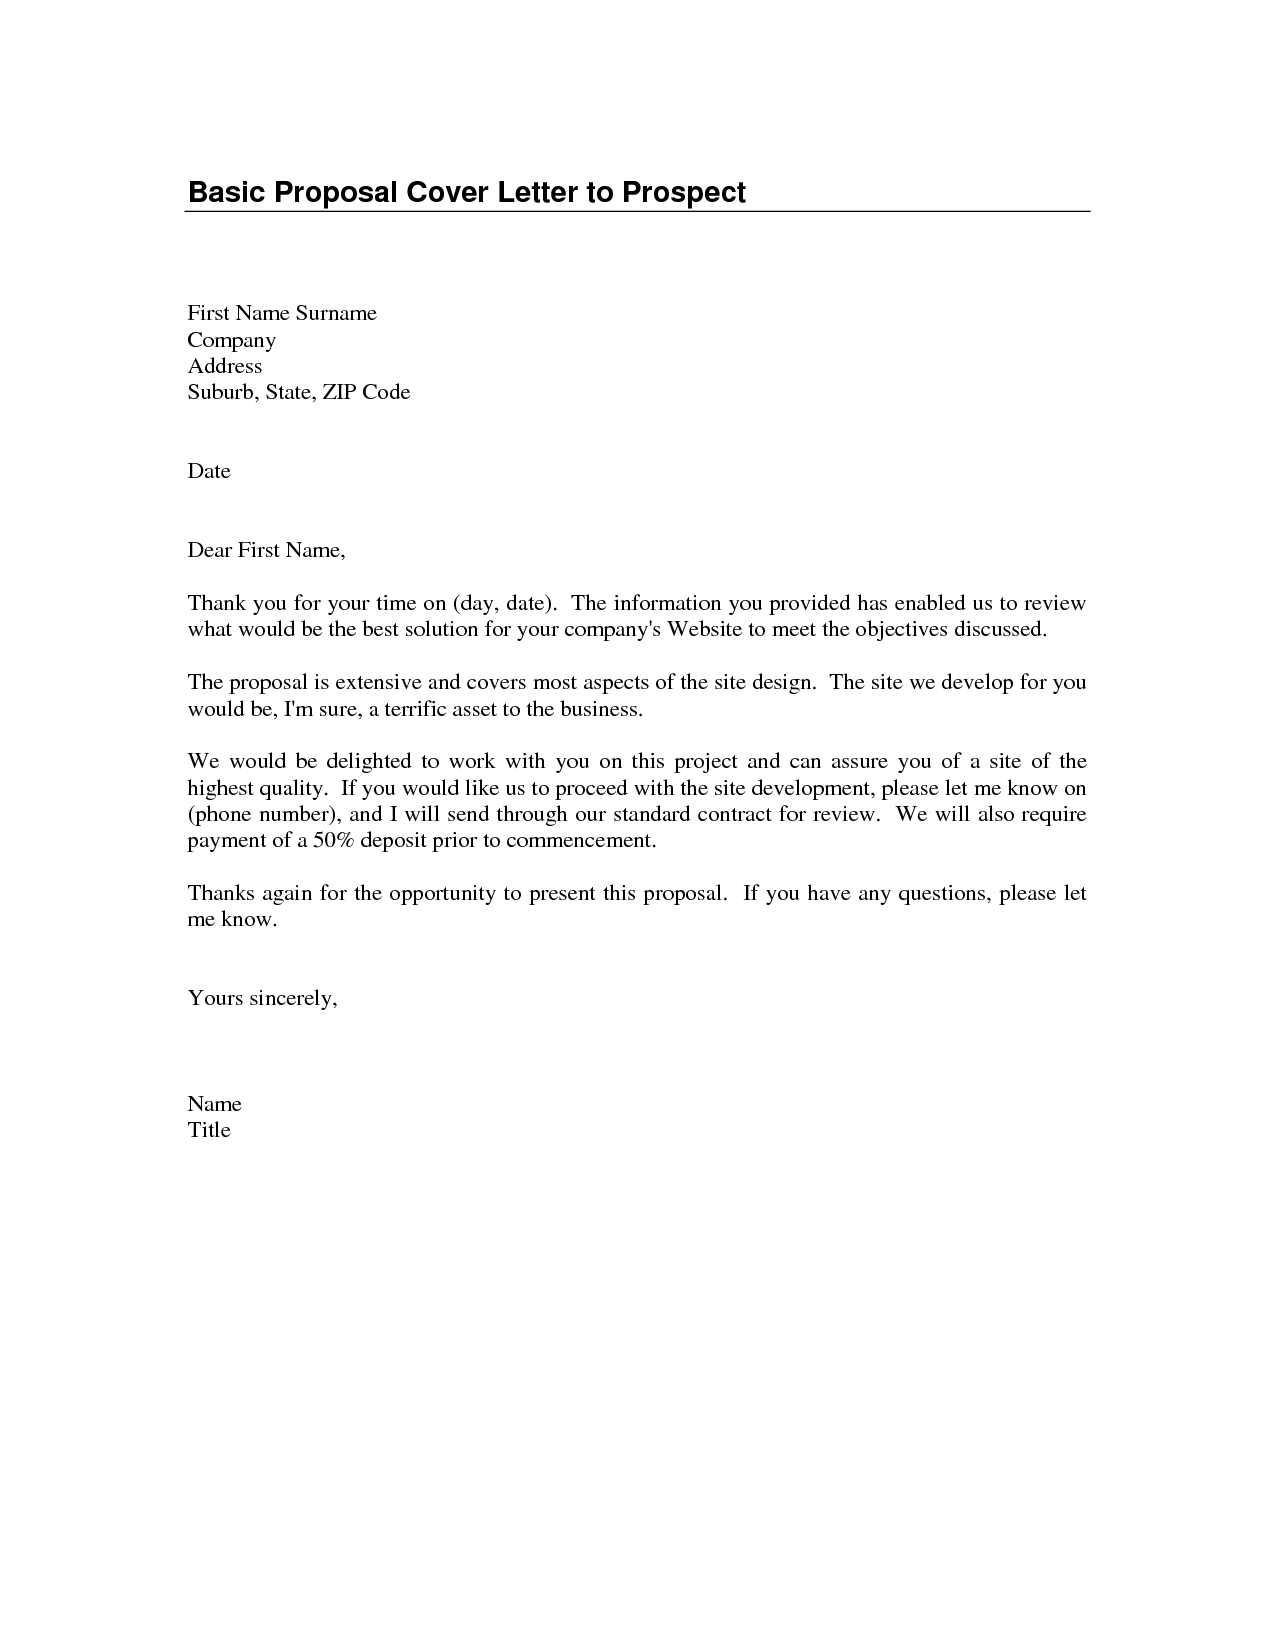 Sample Cover Letter And Proposal Omoalata Of For The 